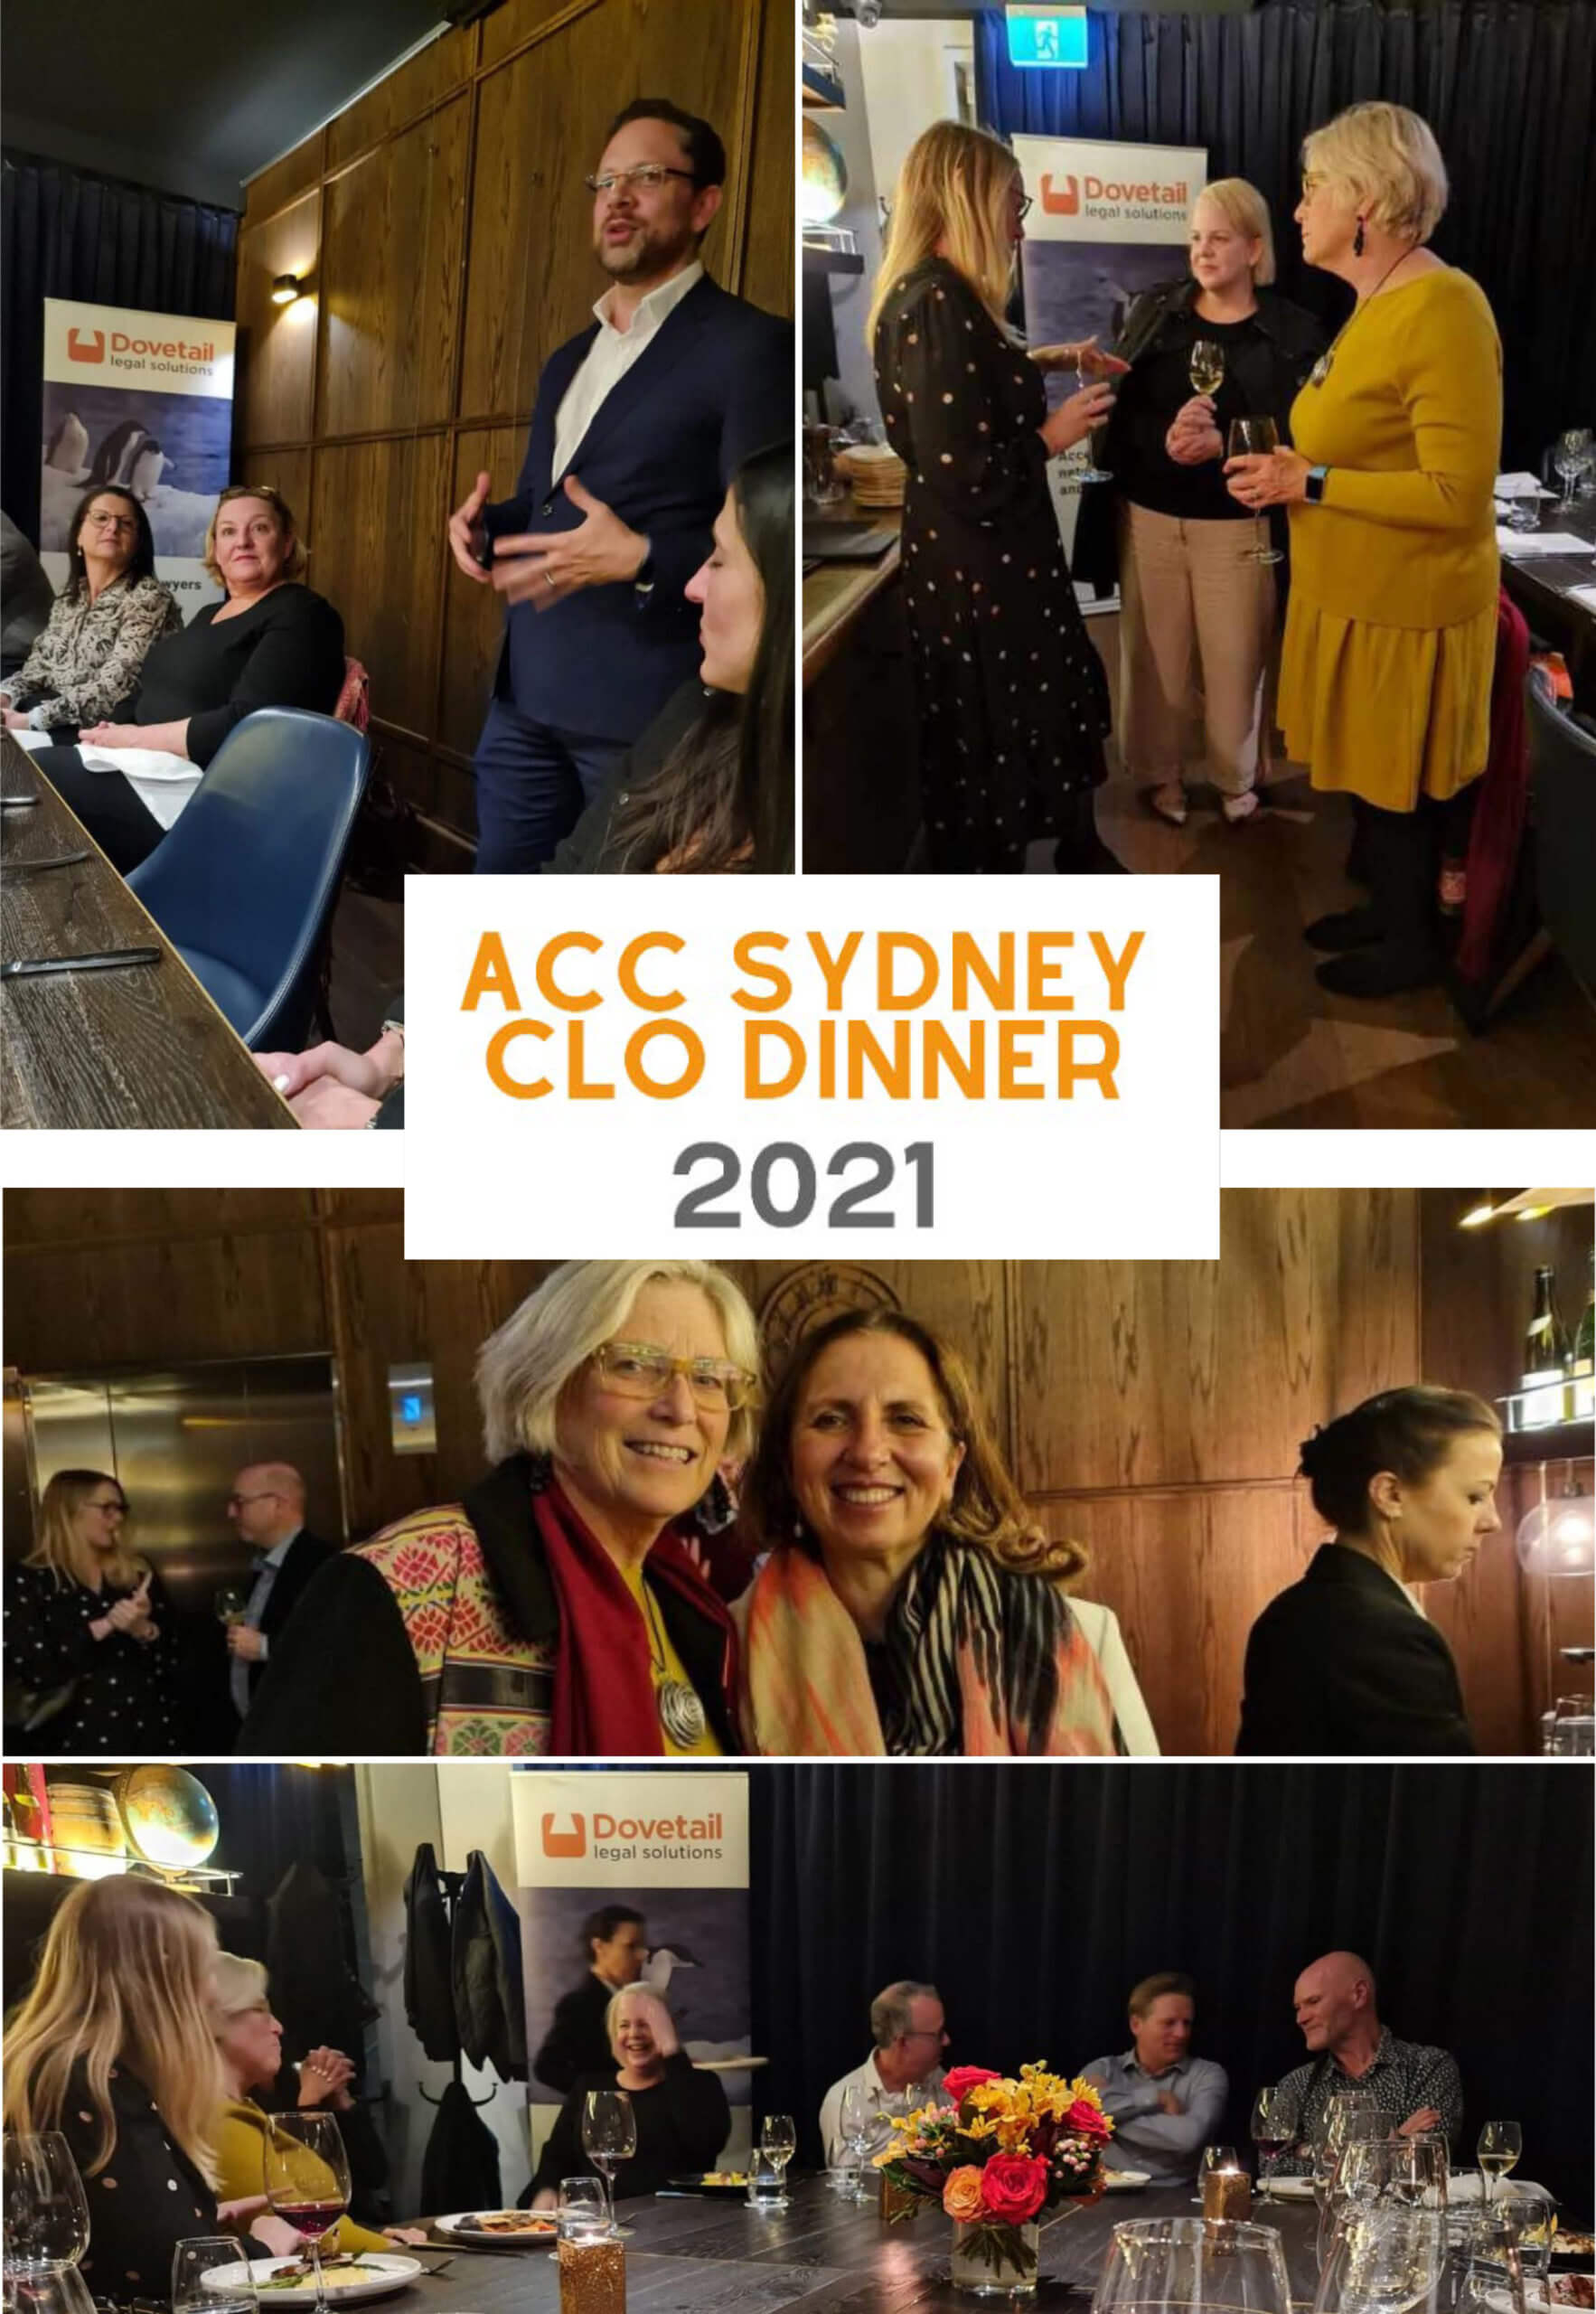 ACC Chief Legal Counsel Dinners 2021